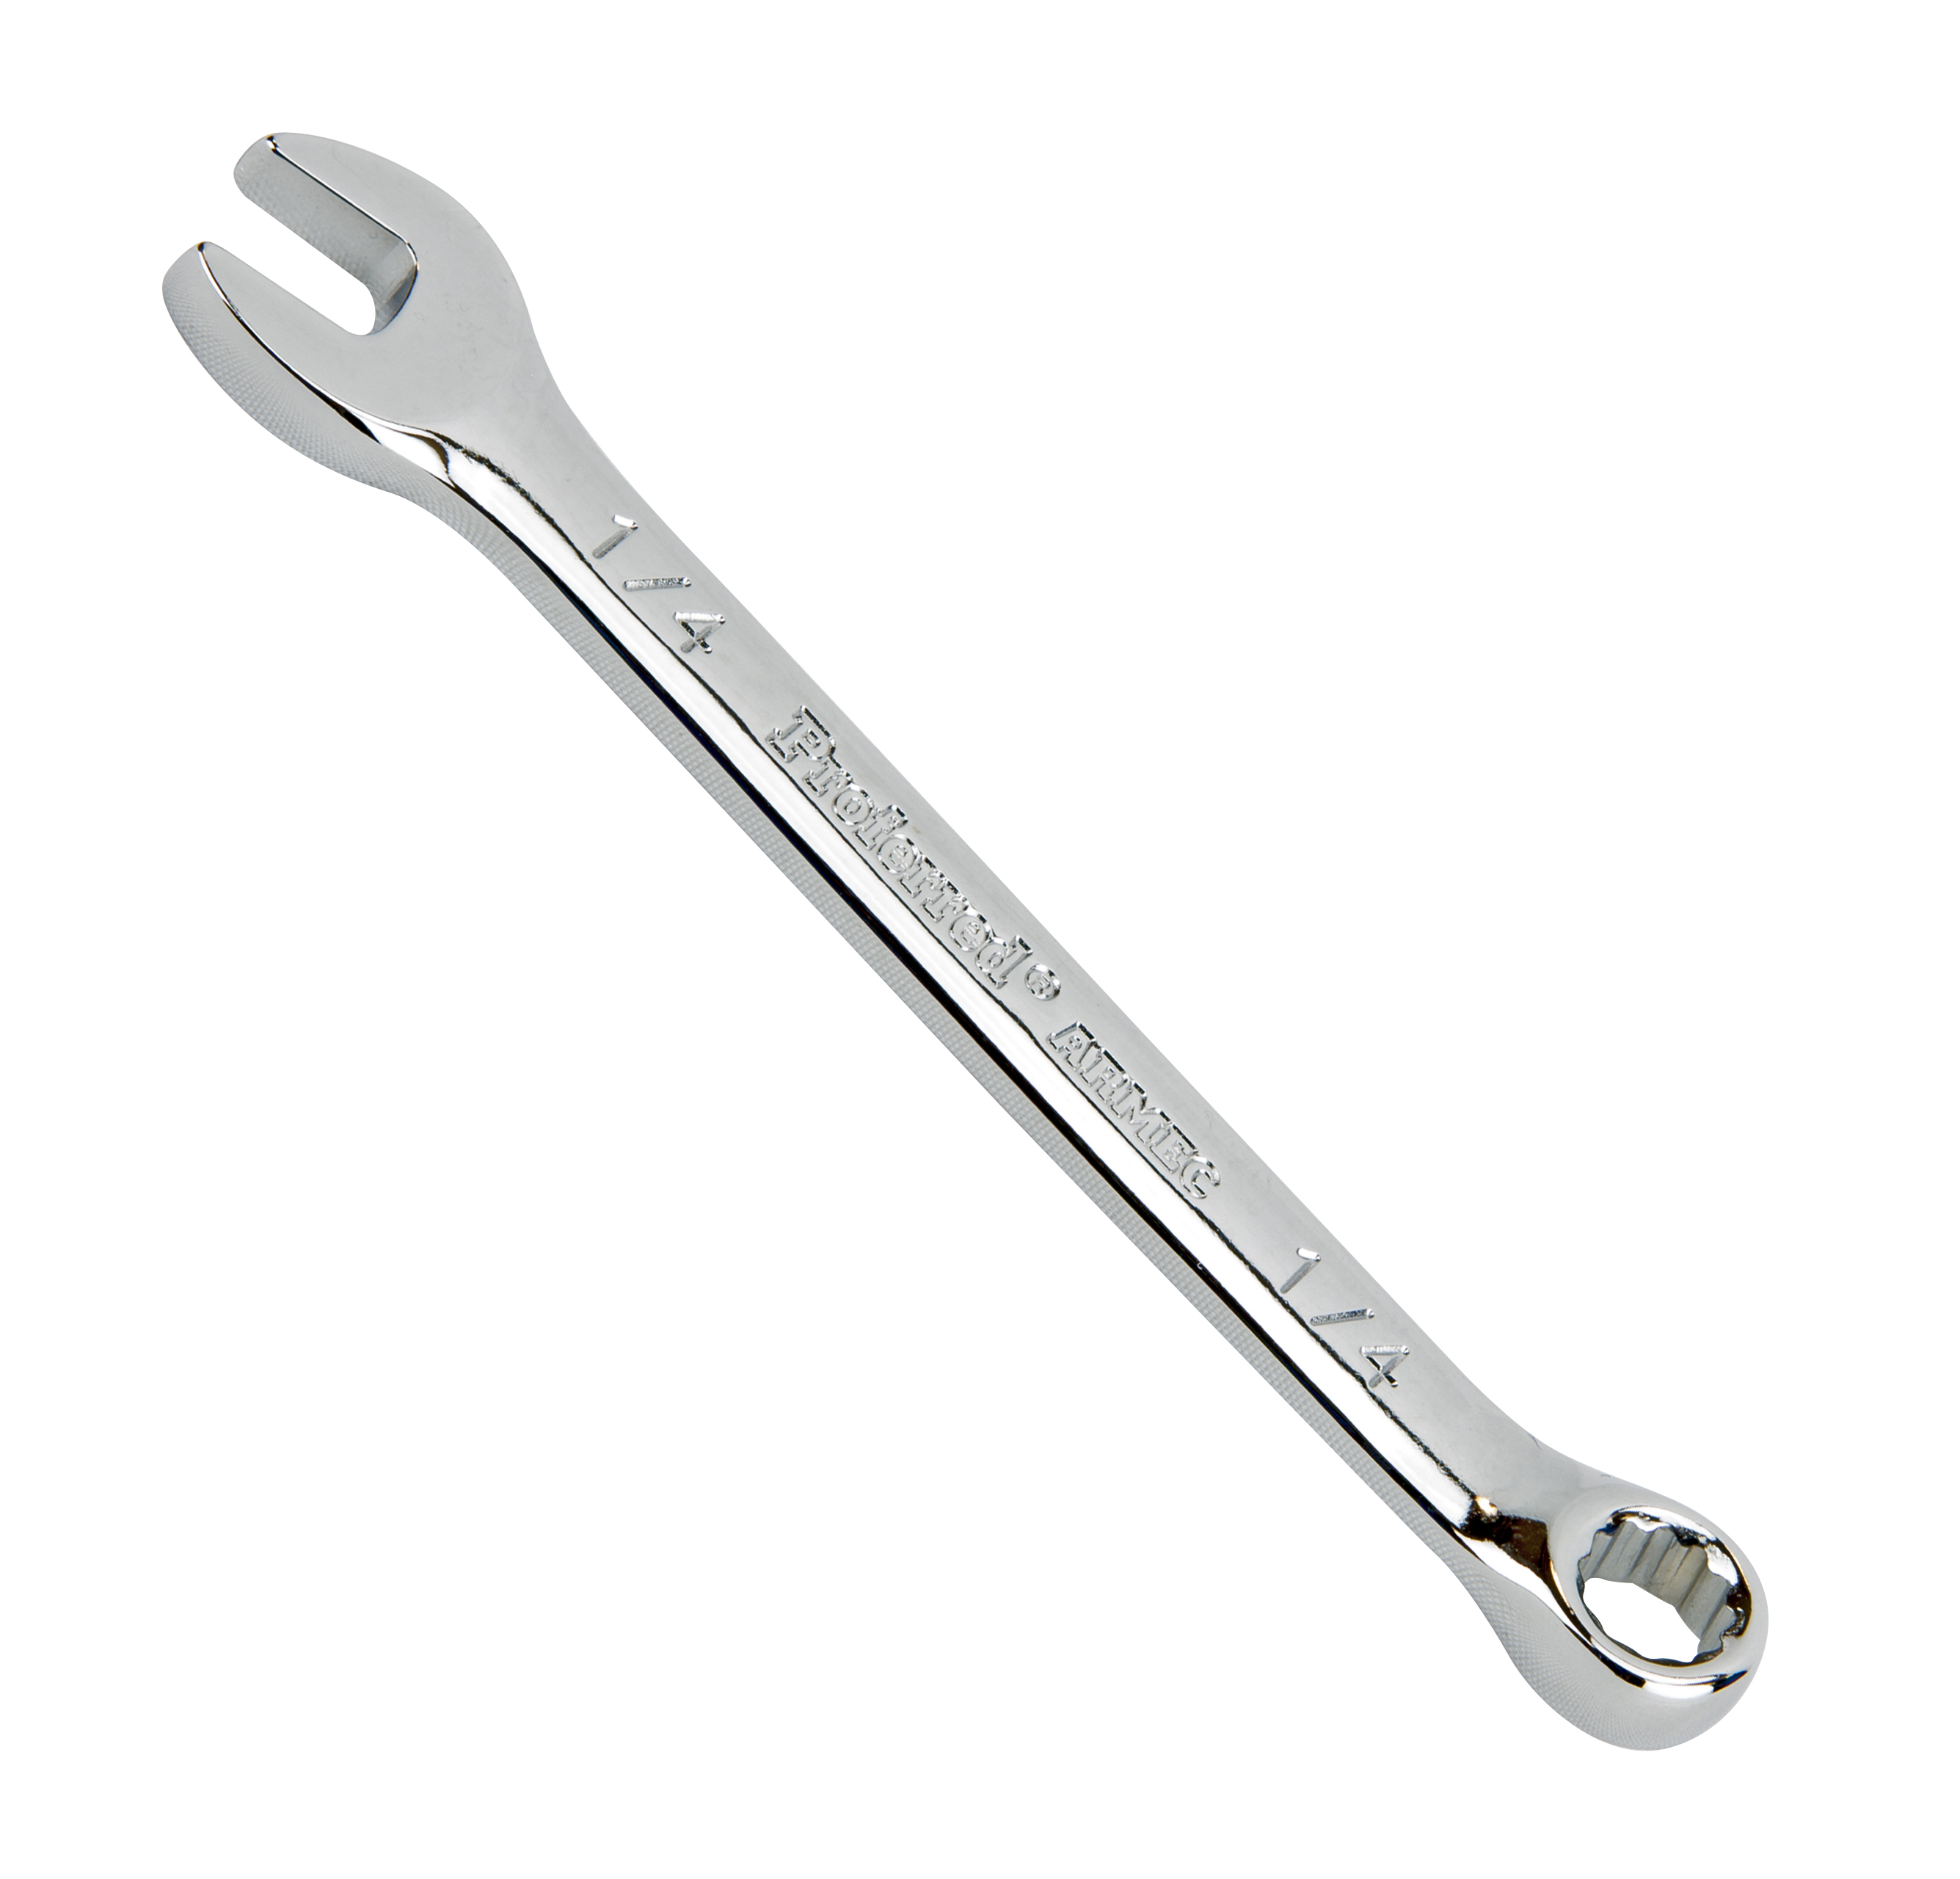 Combo Wrench